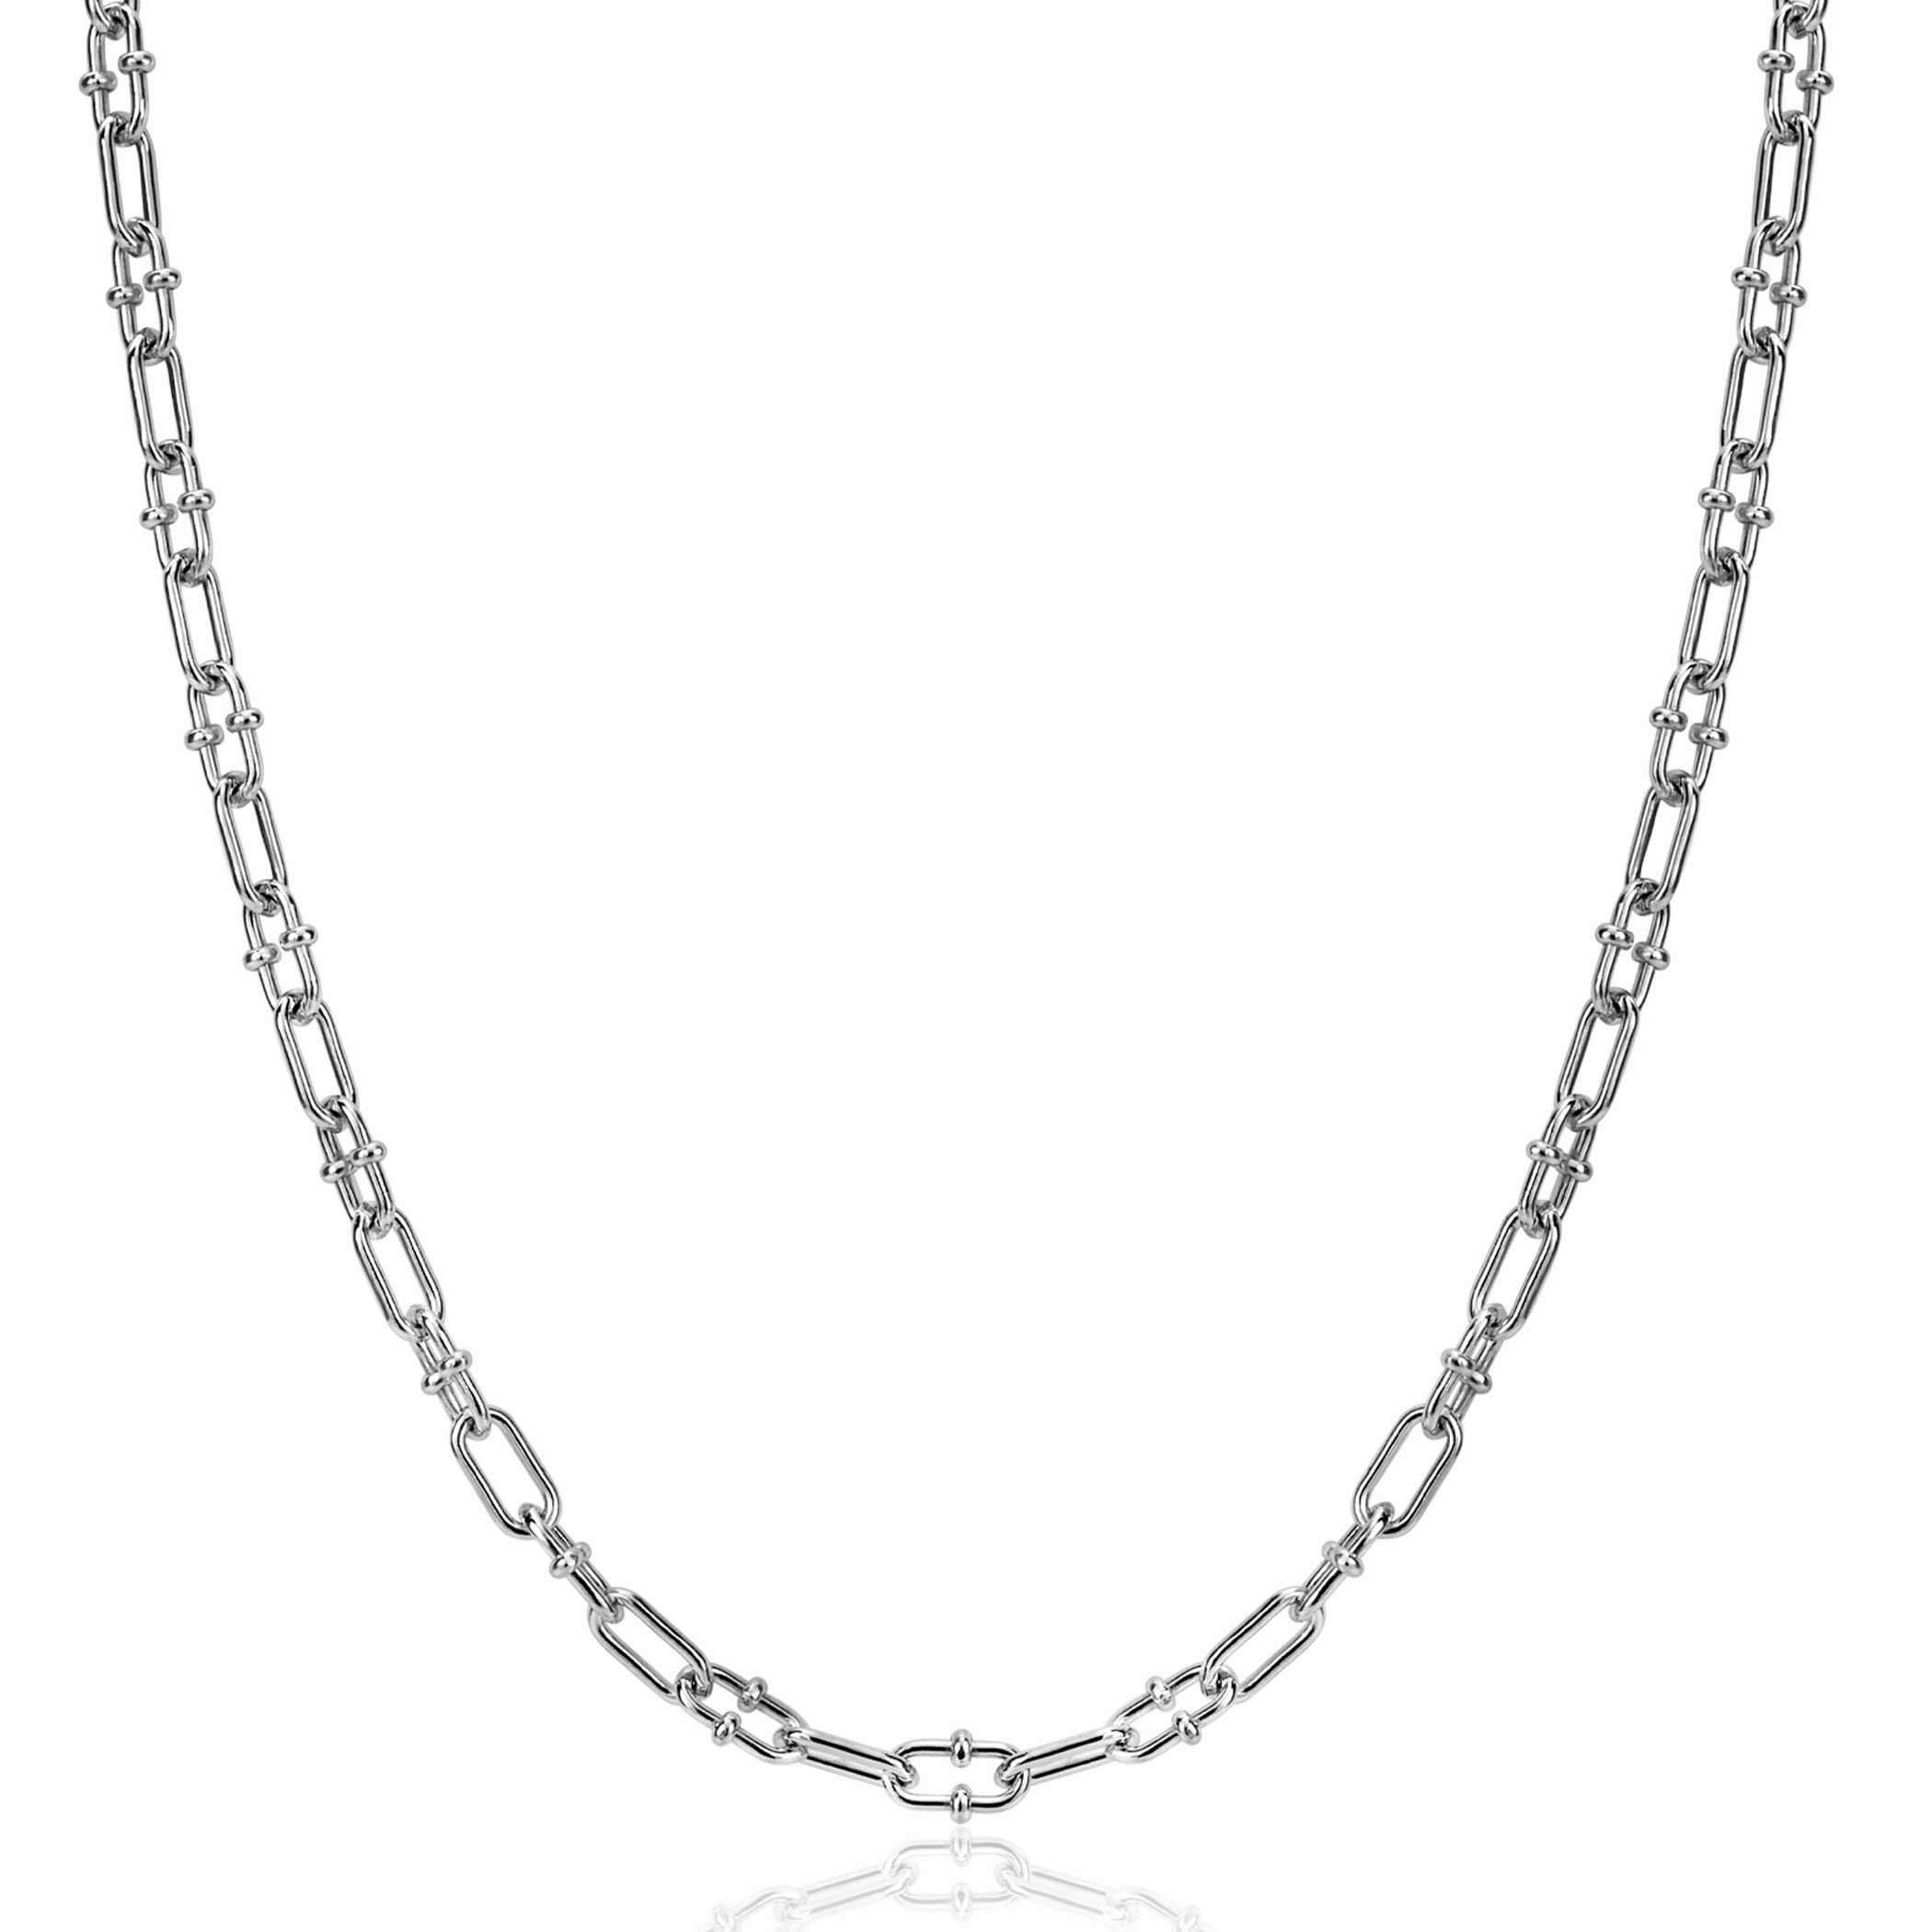 ZINZI silver necklace with 4mm paperclip links, decorated with playful beads 42-45cm ZIC2586